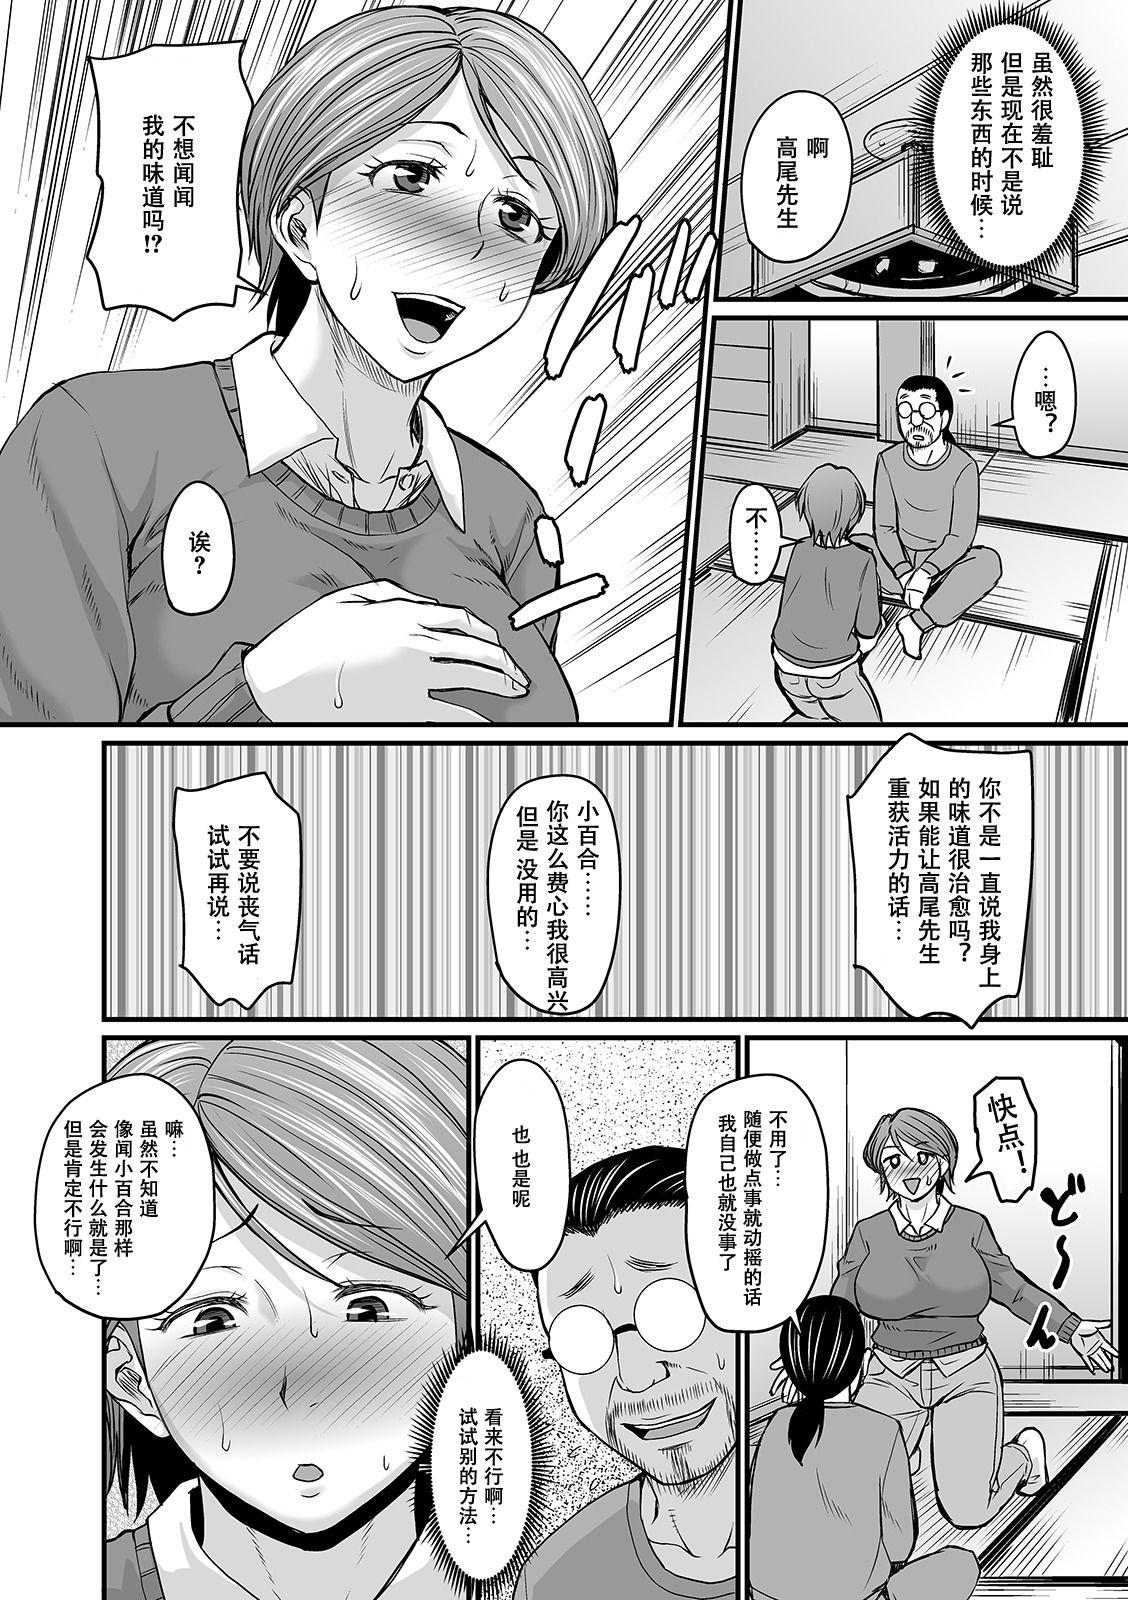 Old And Young ニオイ妻+特濃ニオイ妻 Nylon - Page 6